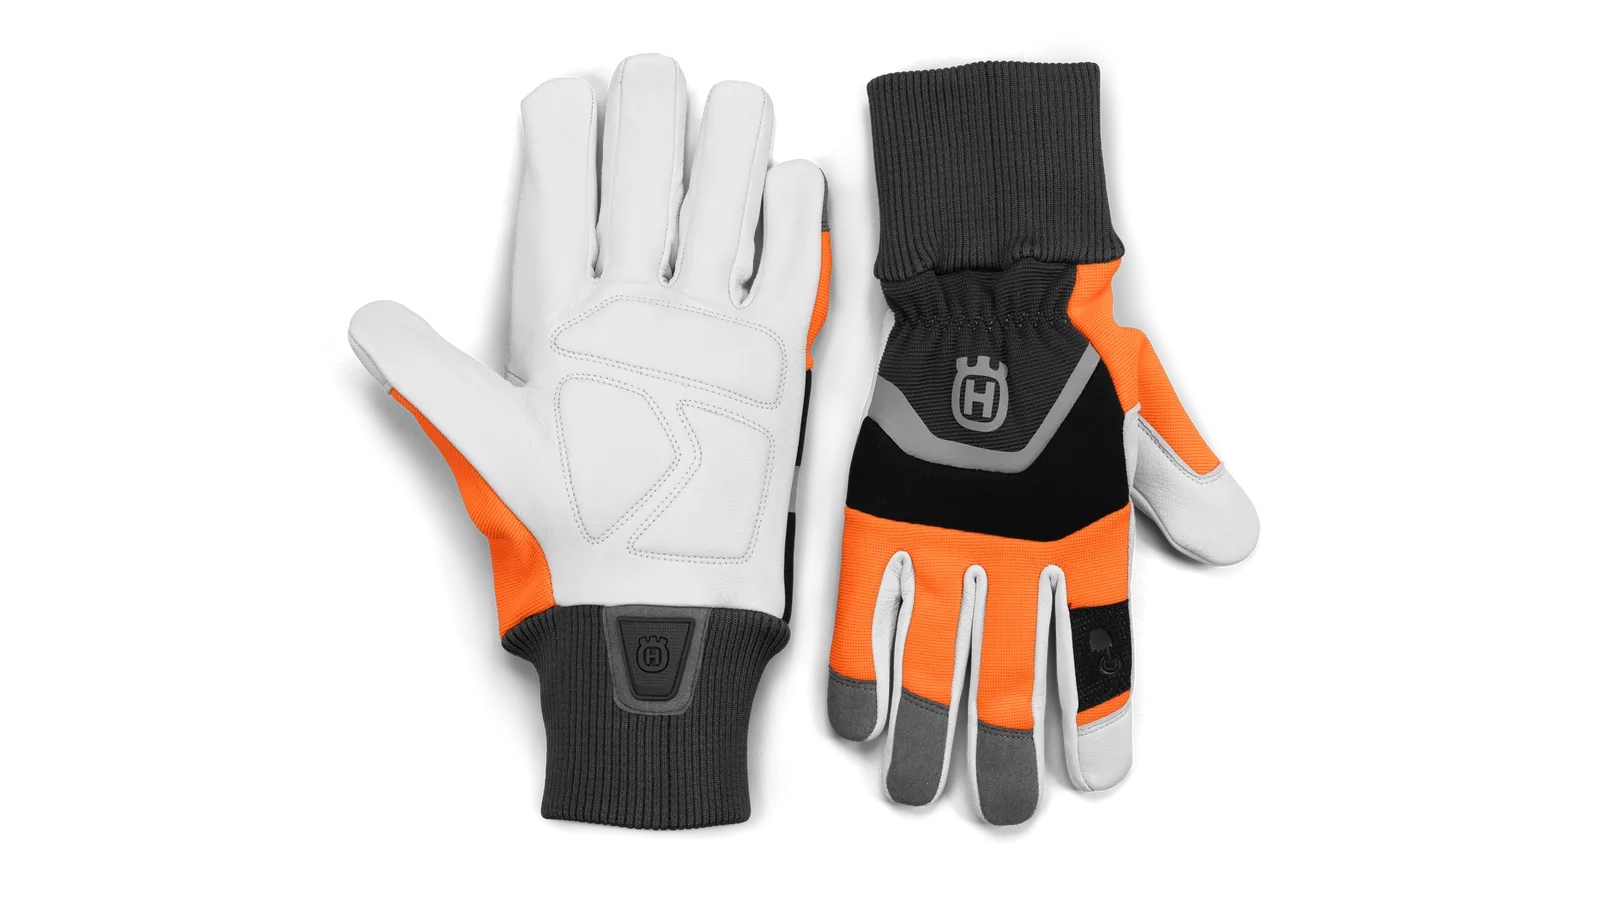 Gloves, Functional with saw protection